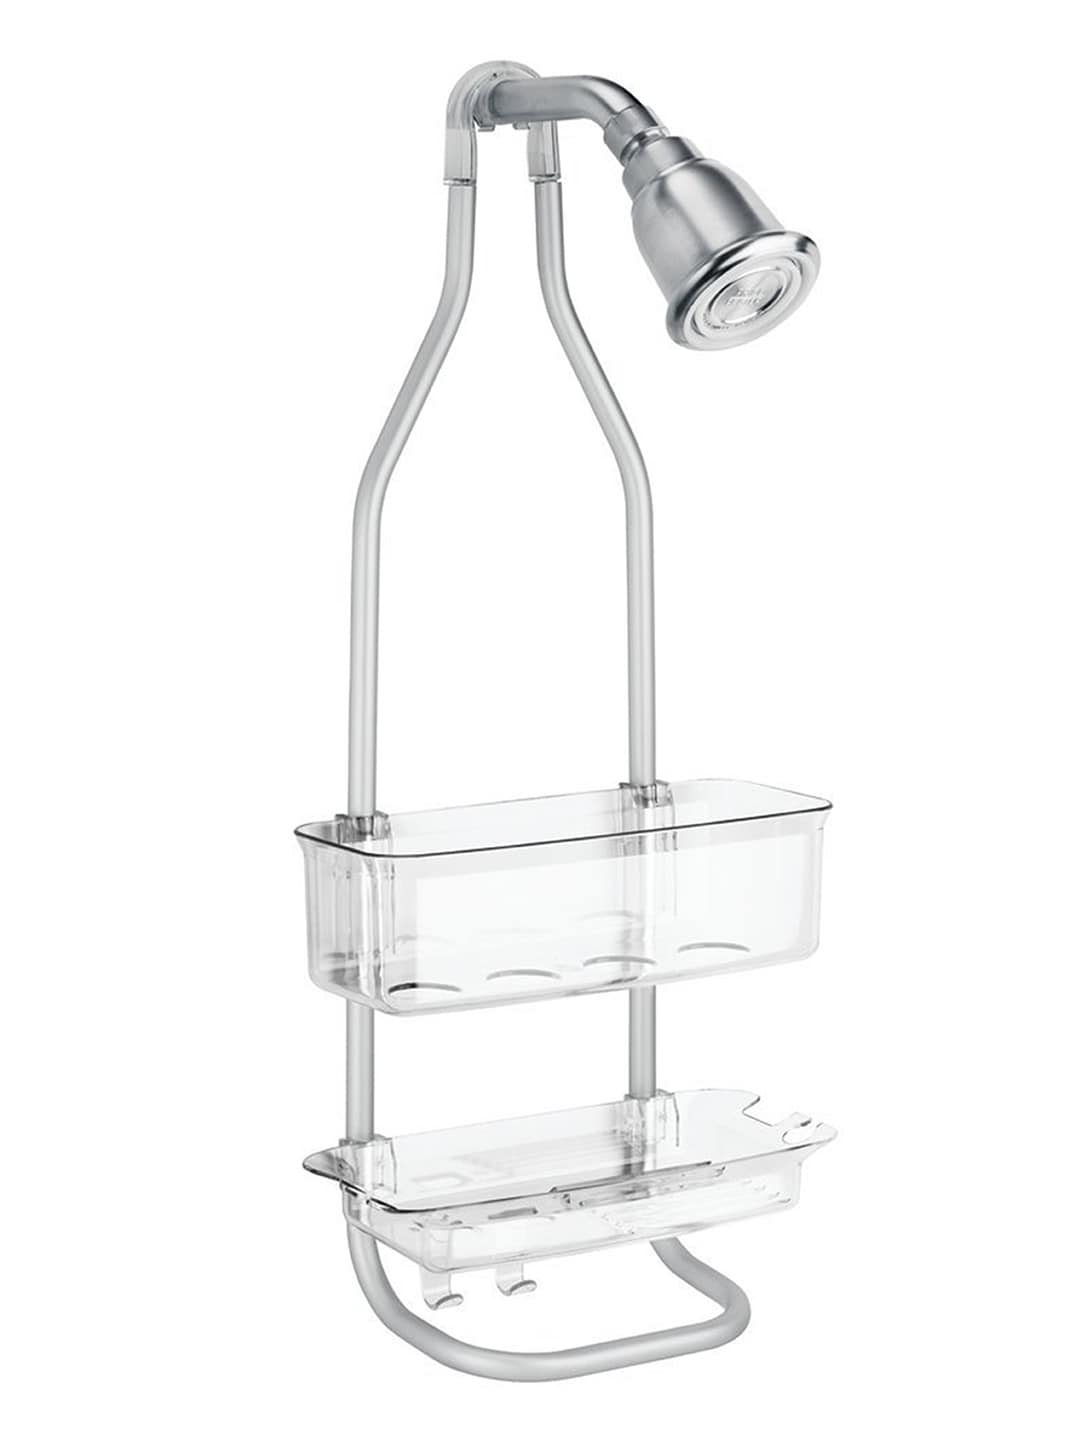 INTERDESIGN Silver-Toned Plastic Shower Caddy Price in India